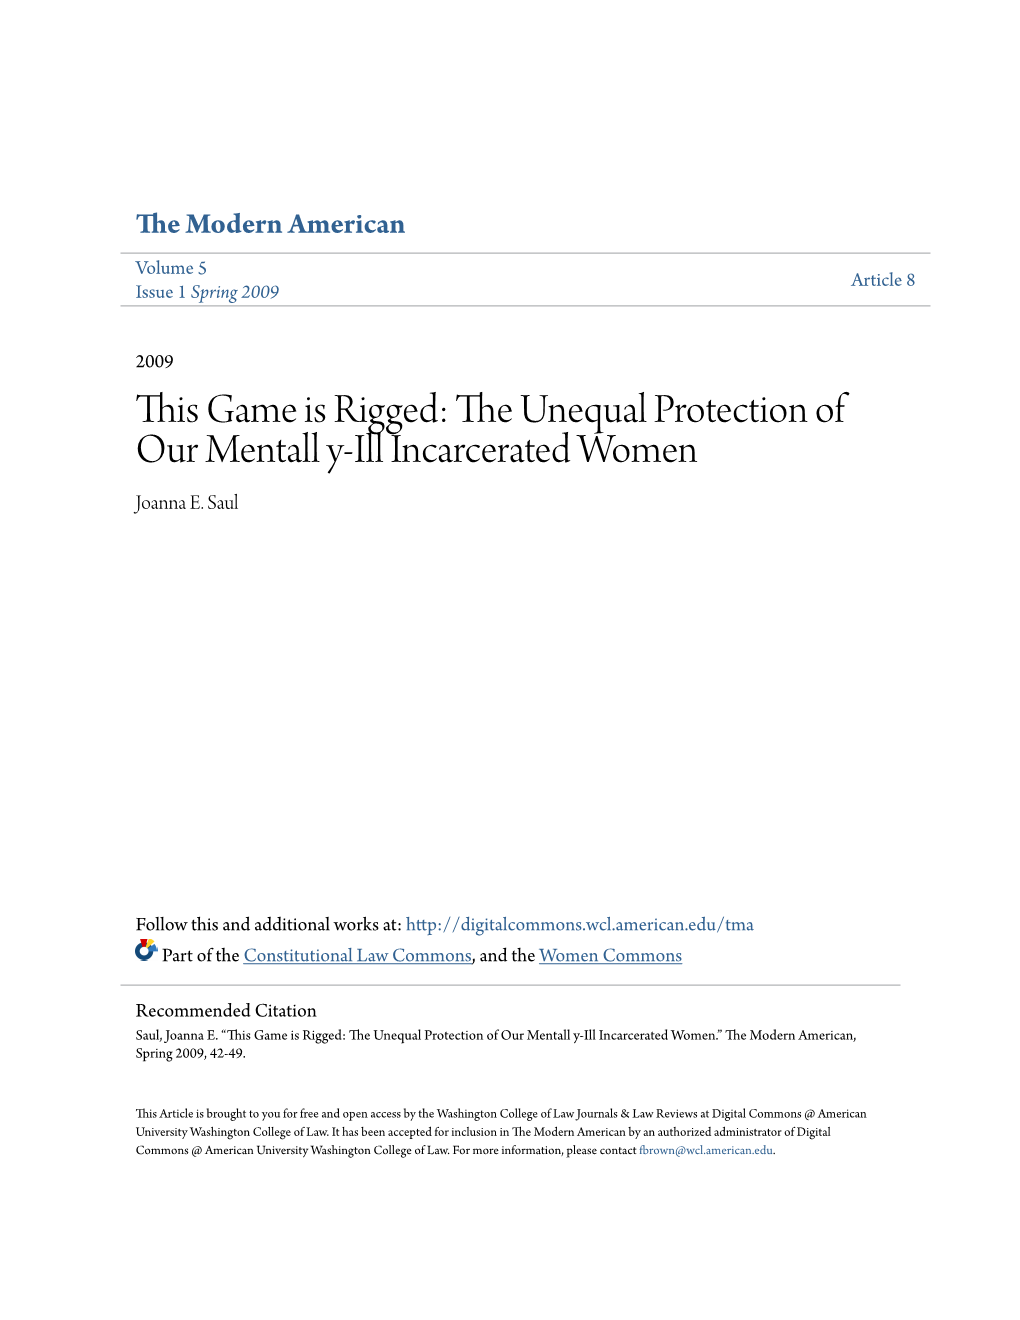 The Unequal Protection of Our Mentall Y-Ill Incarcerated Women